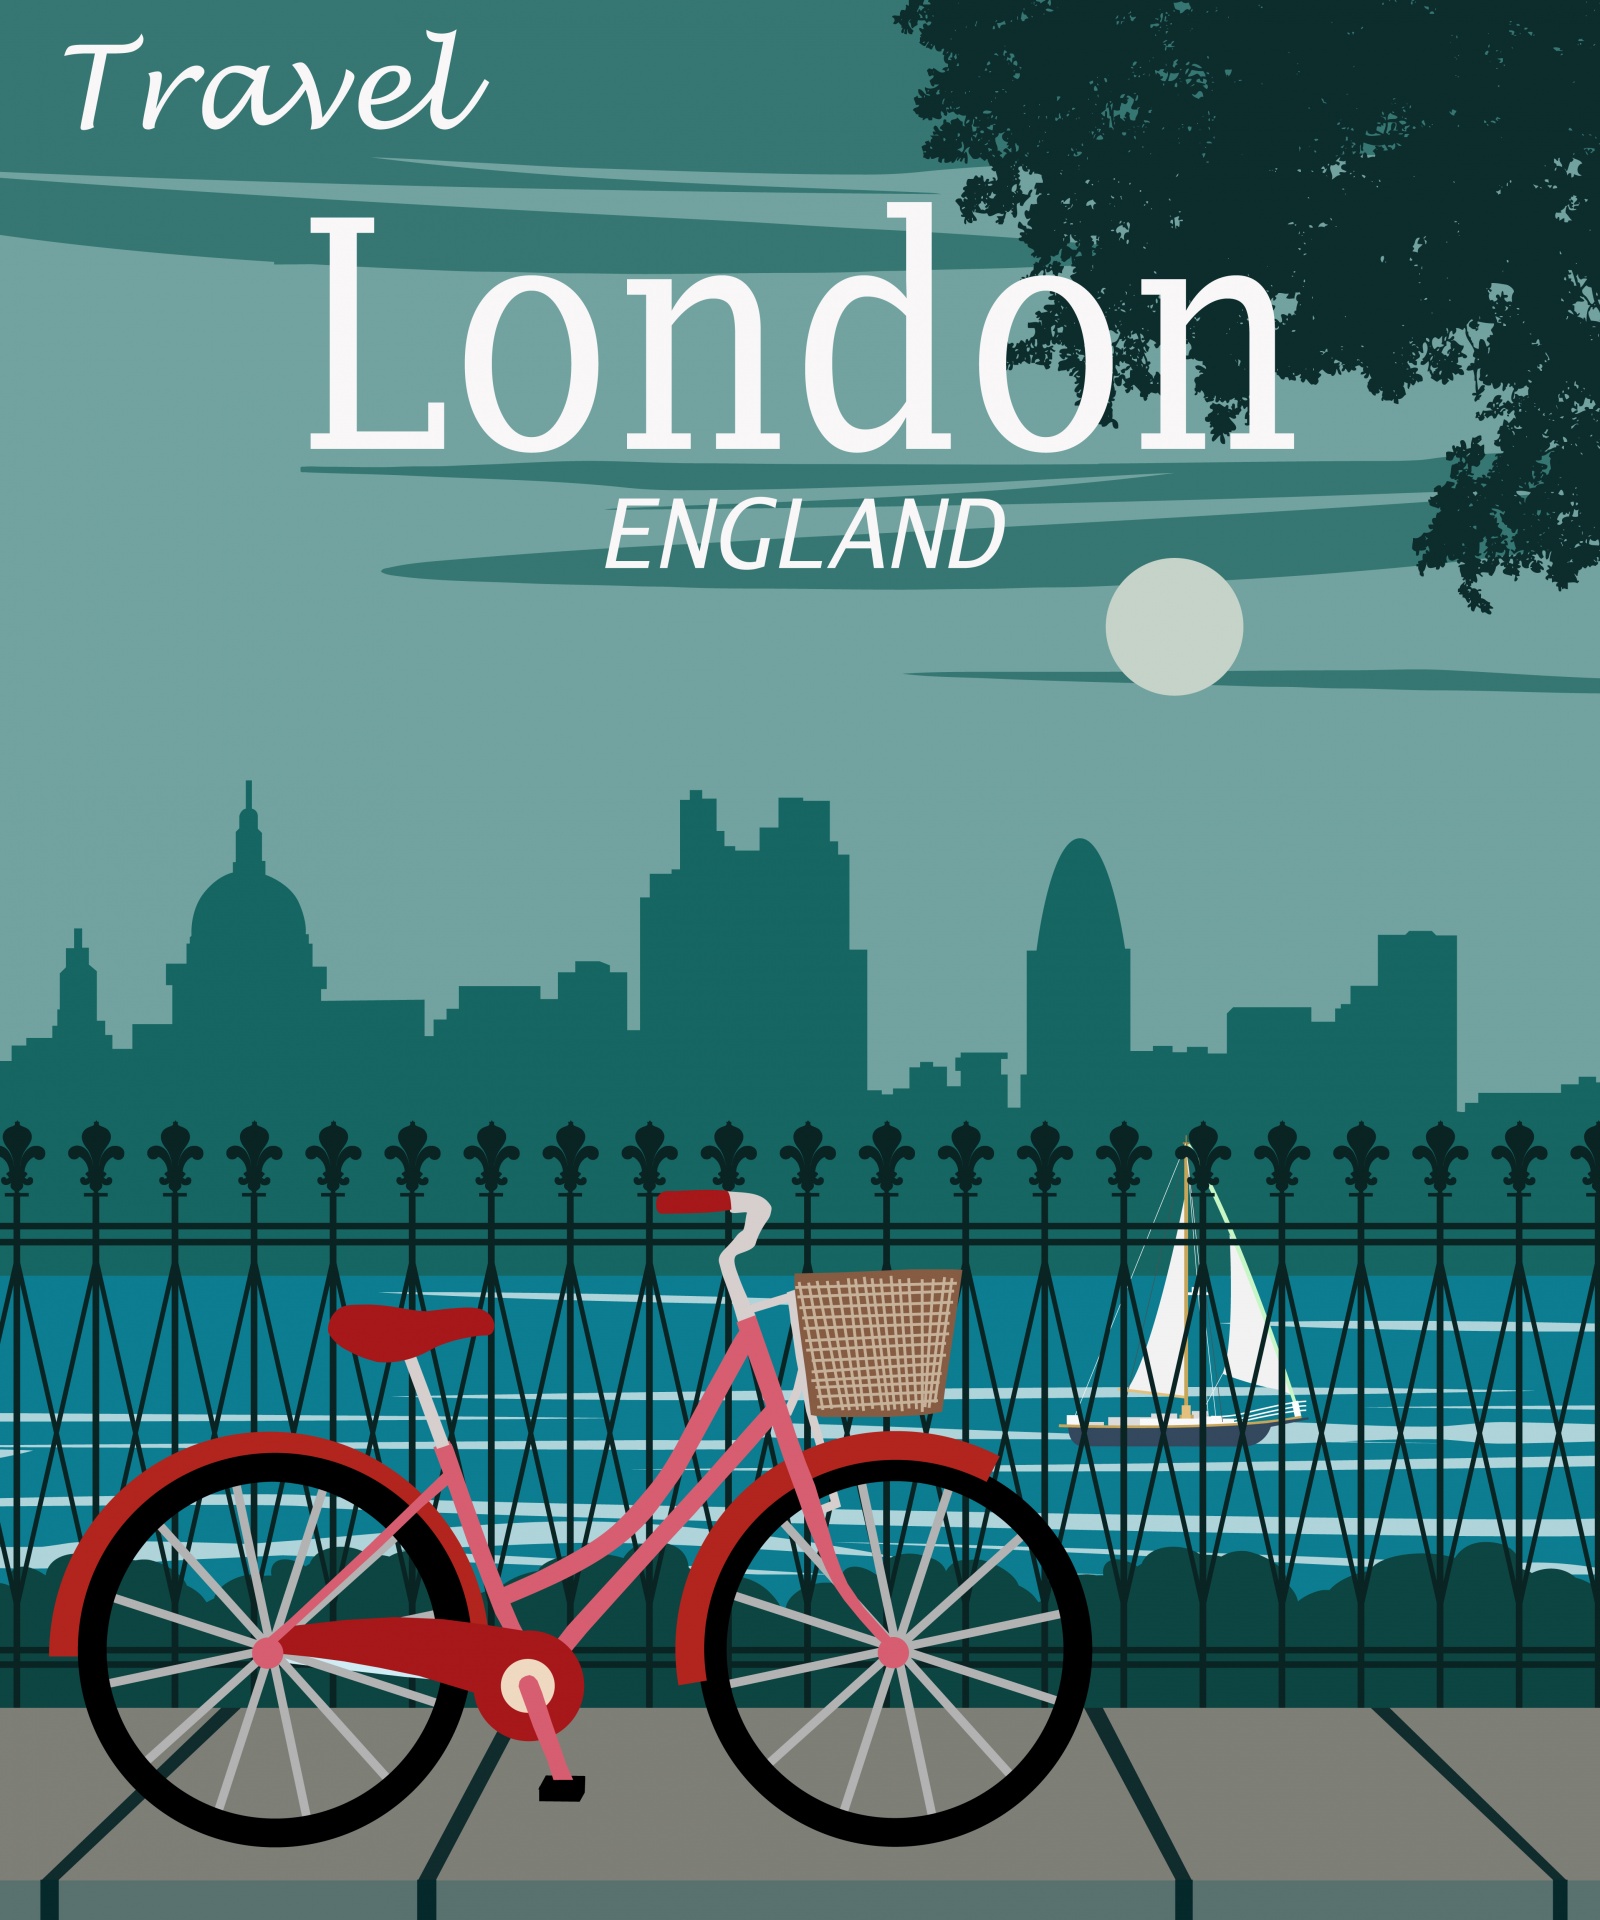 london travel posters